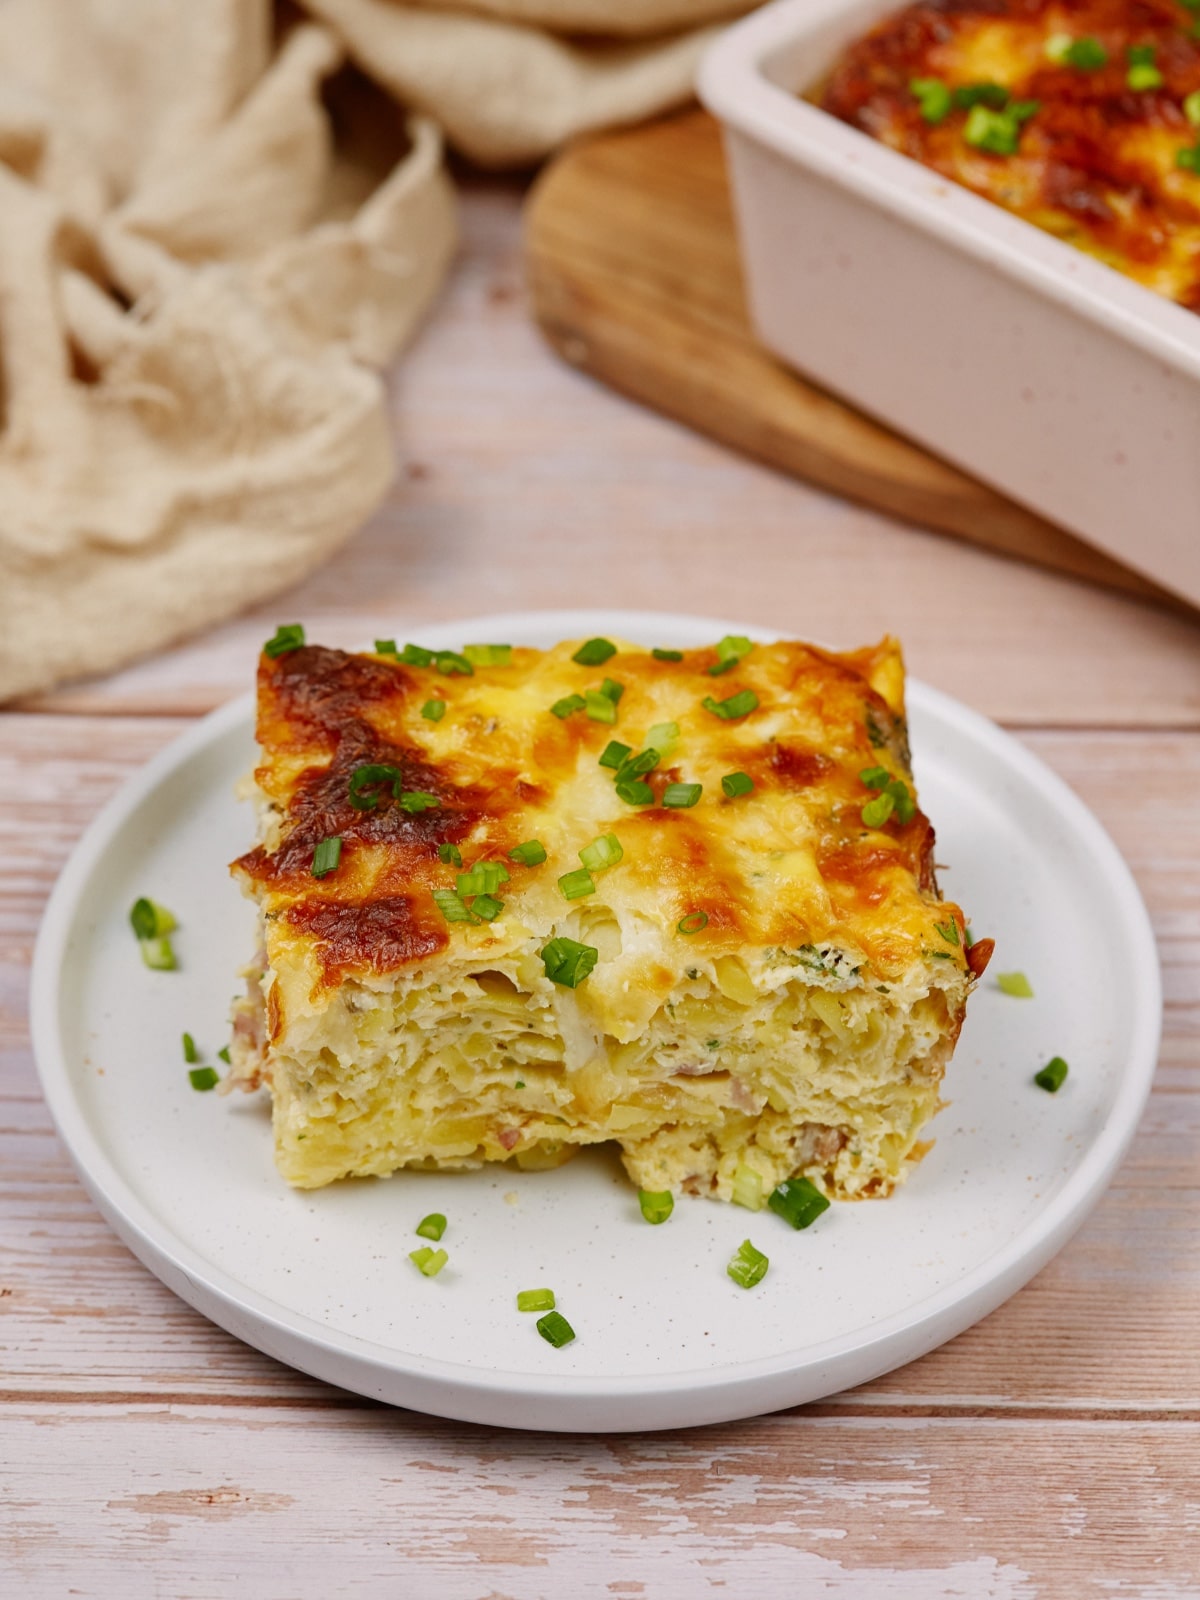 a serving of egg and hashbrown casserole on a plate